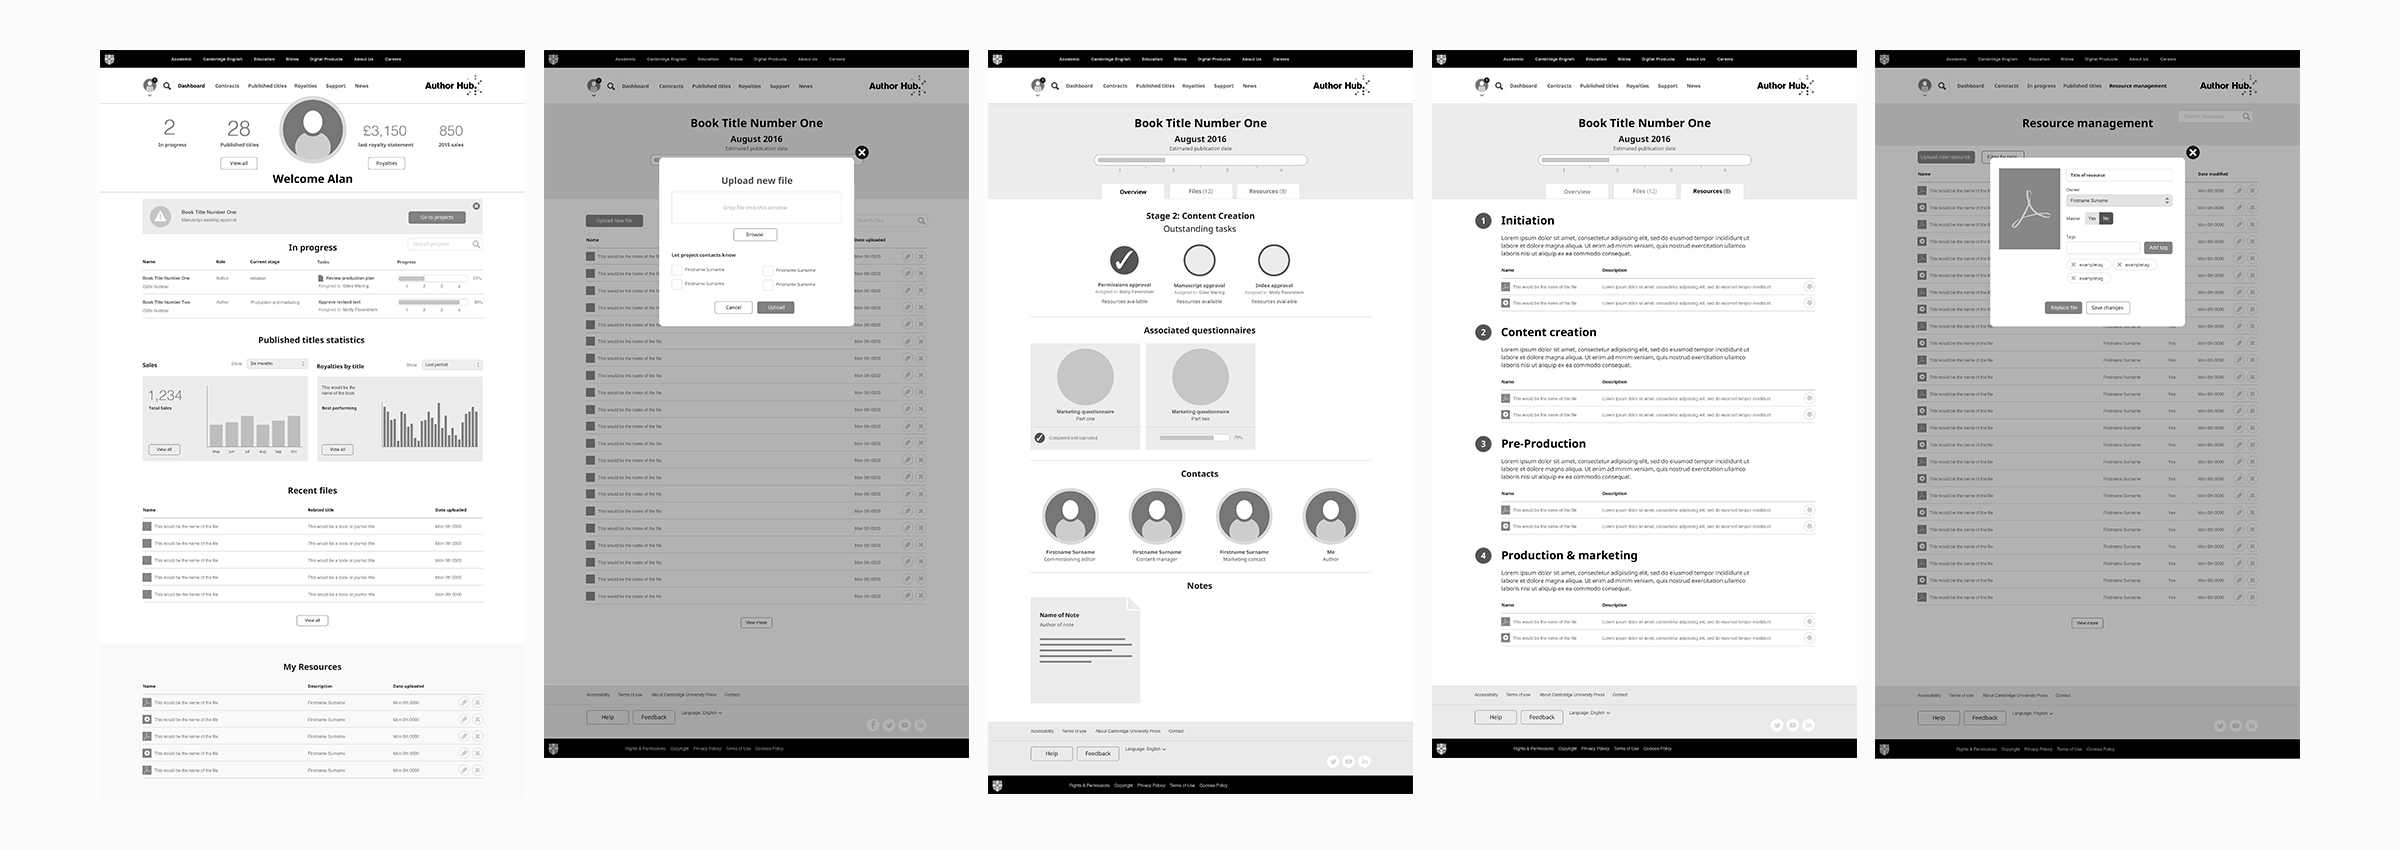 authorhub_wireframes_a1.png